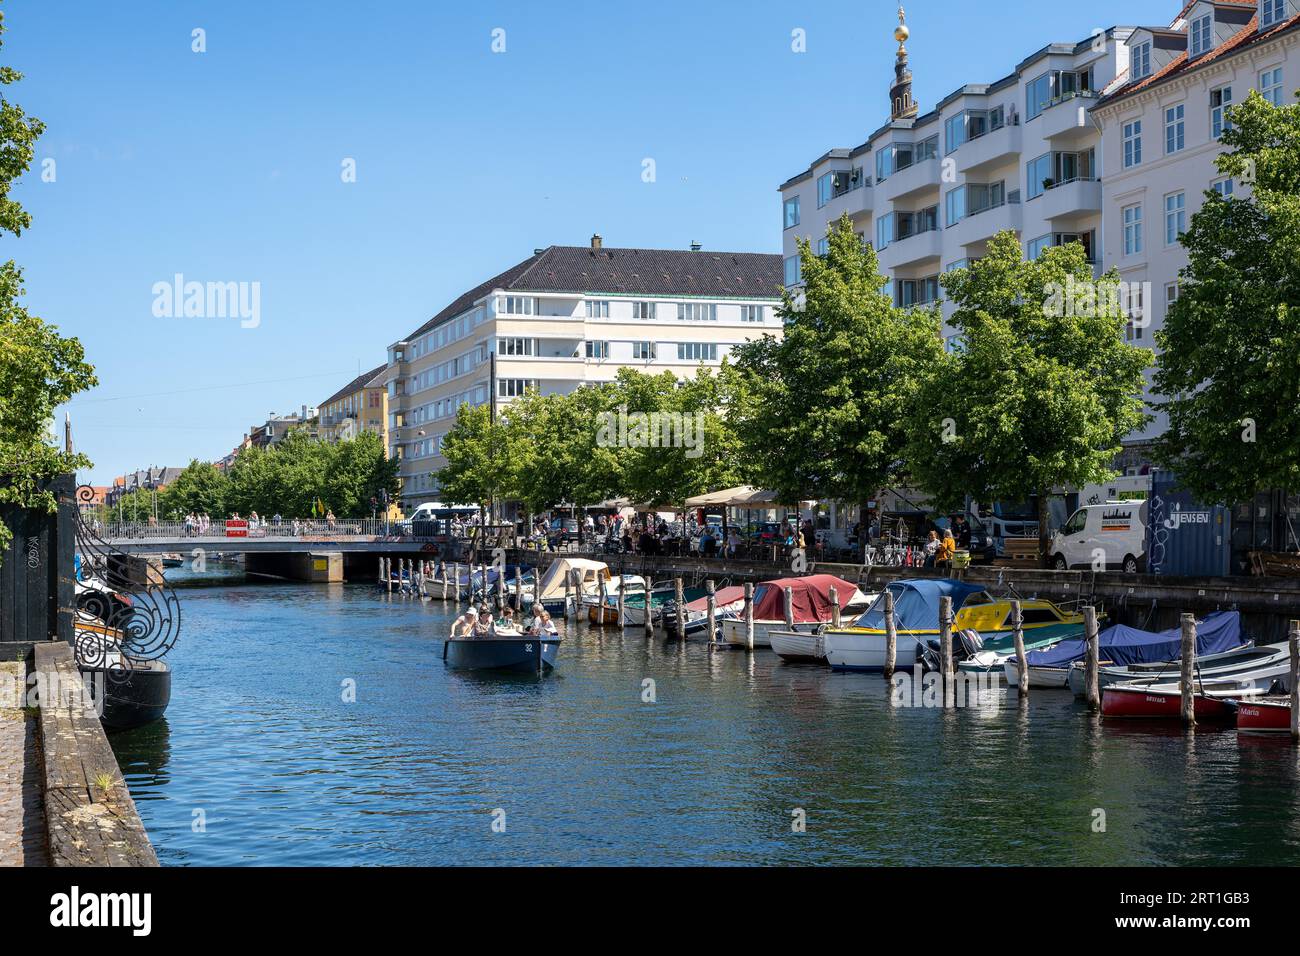 Copenhagen, Denmark, July 12, 2022: A canal and boats in Christianshavn district in the historic city centre Stock Photo